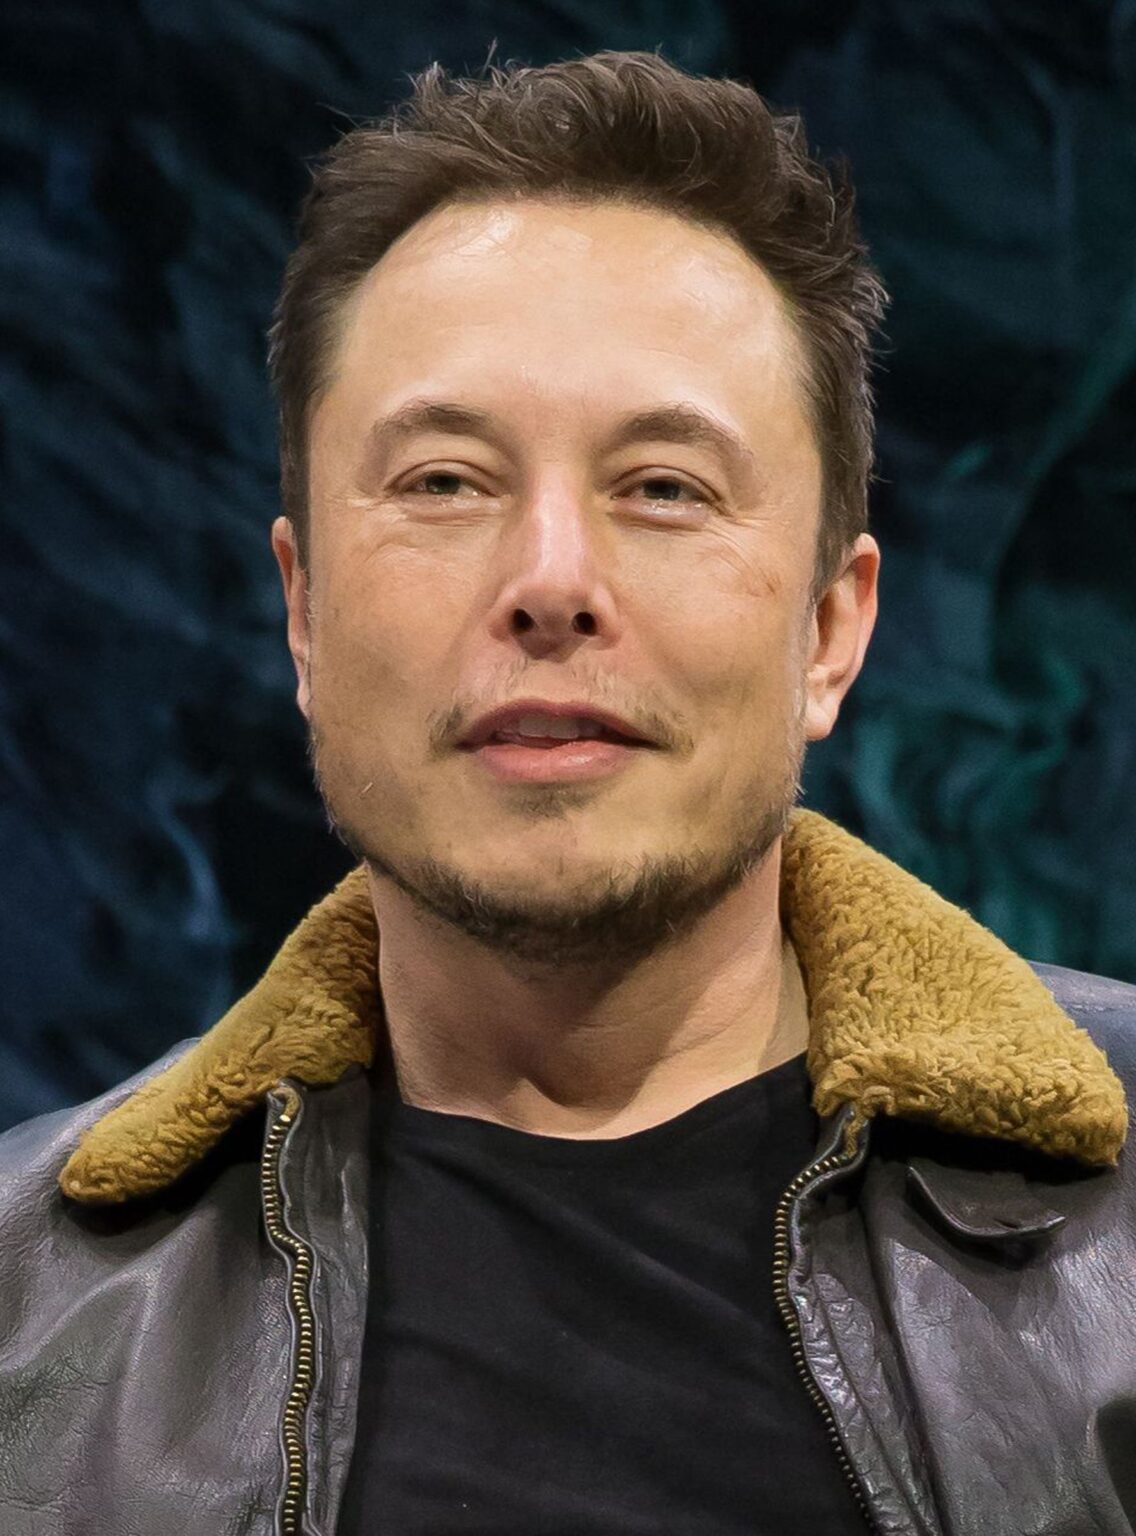 Musk 'trolling' puts brakes on bitcoin's rebound - Daily ...